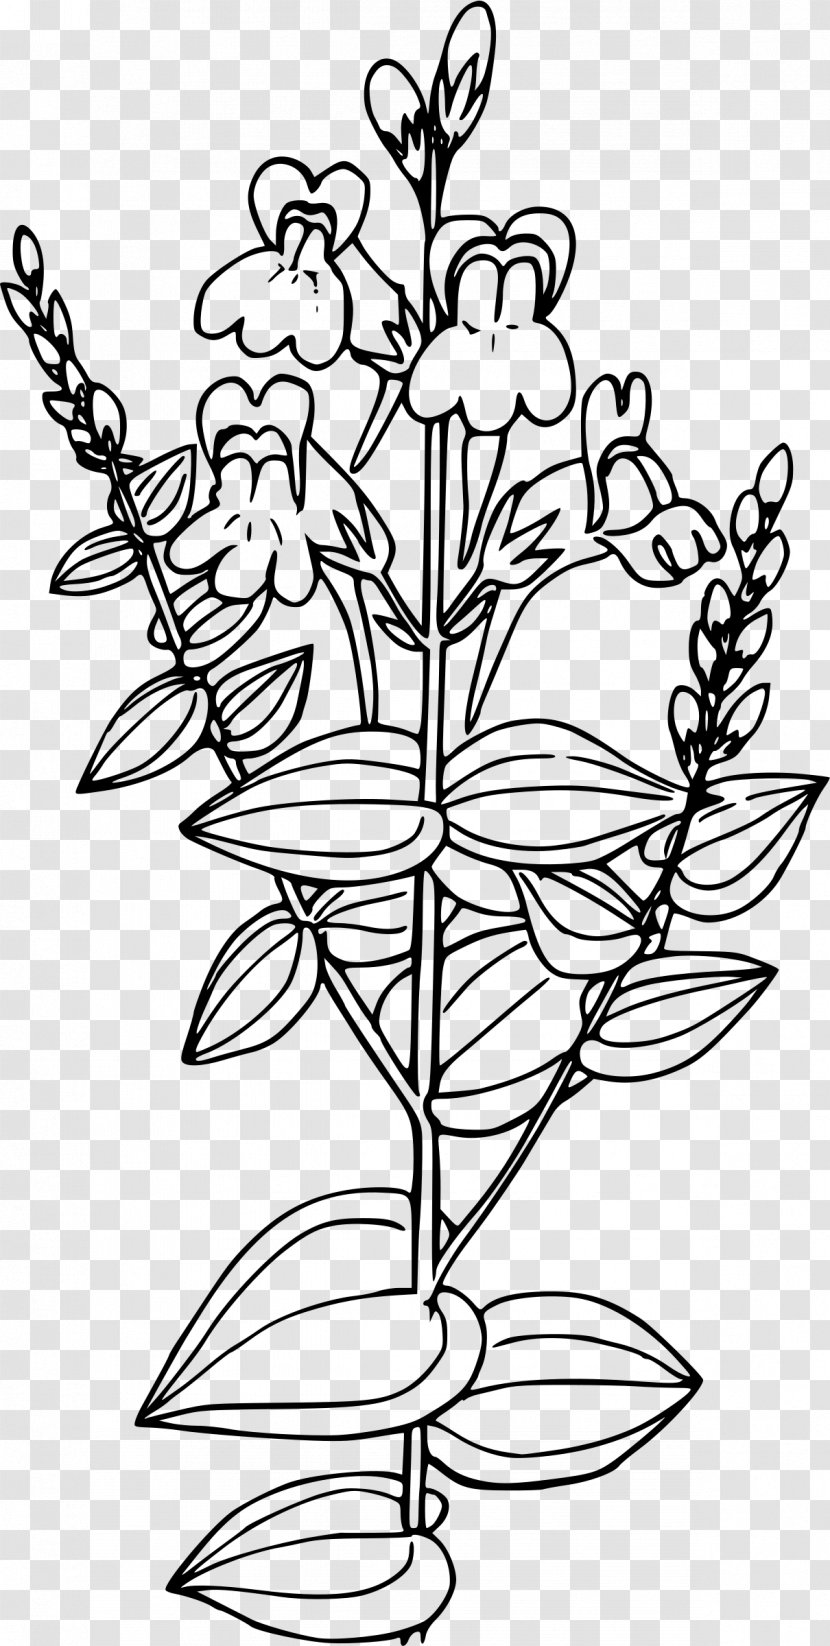 Linaria Vulgaris Clip Art - United States National Forest - Flower Transparent PNG